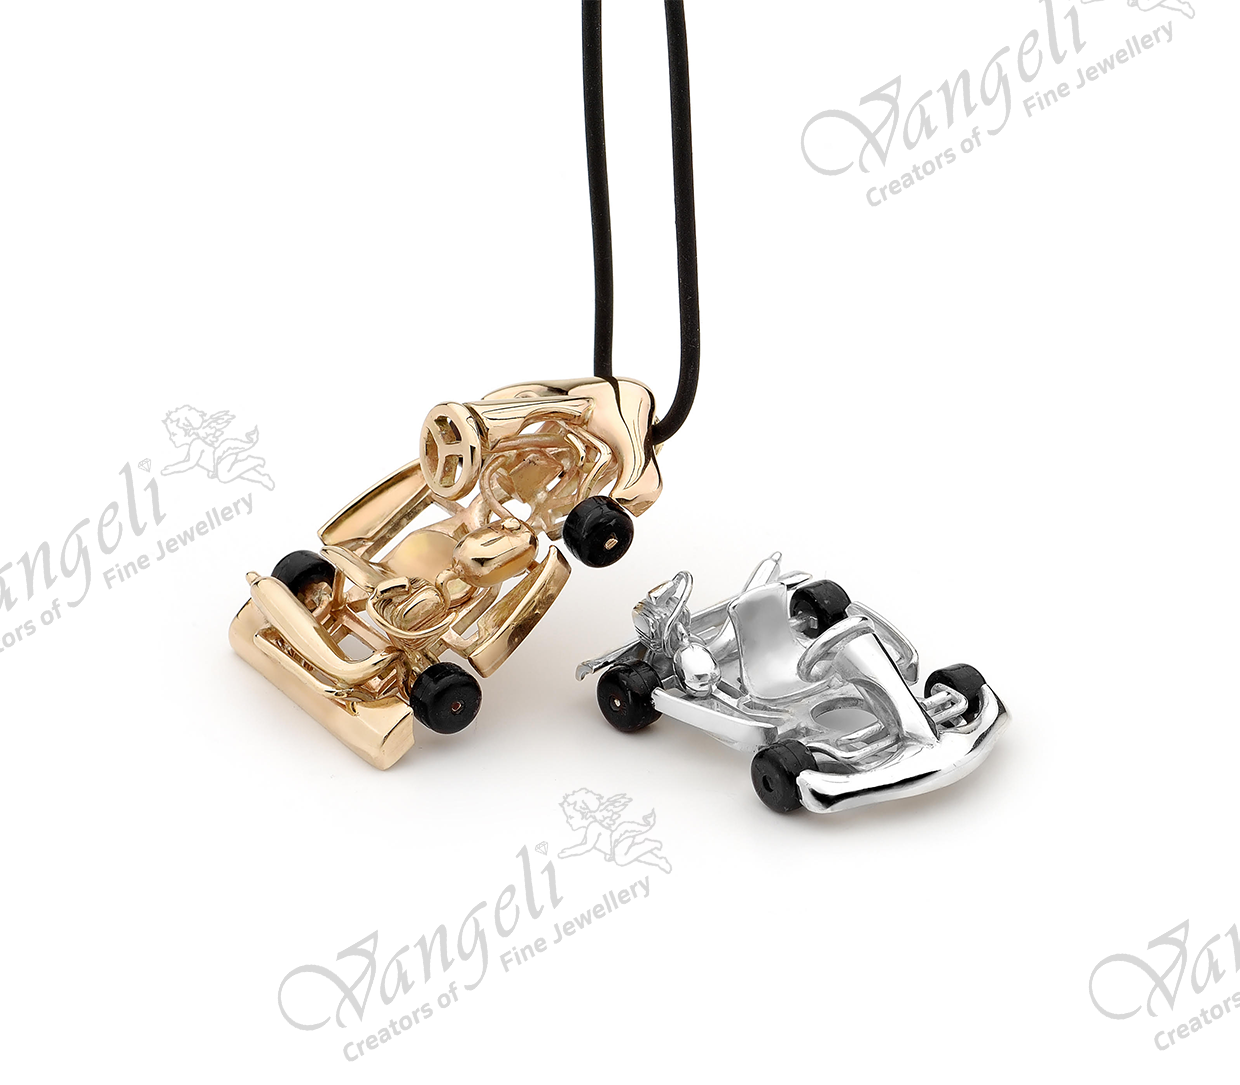 Custom deigned silver and gold go carts